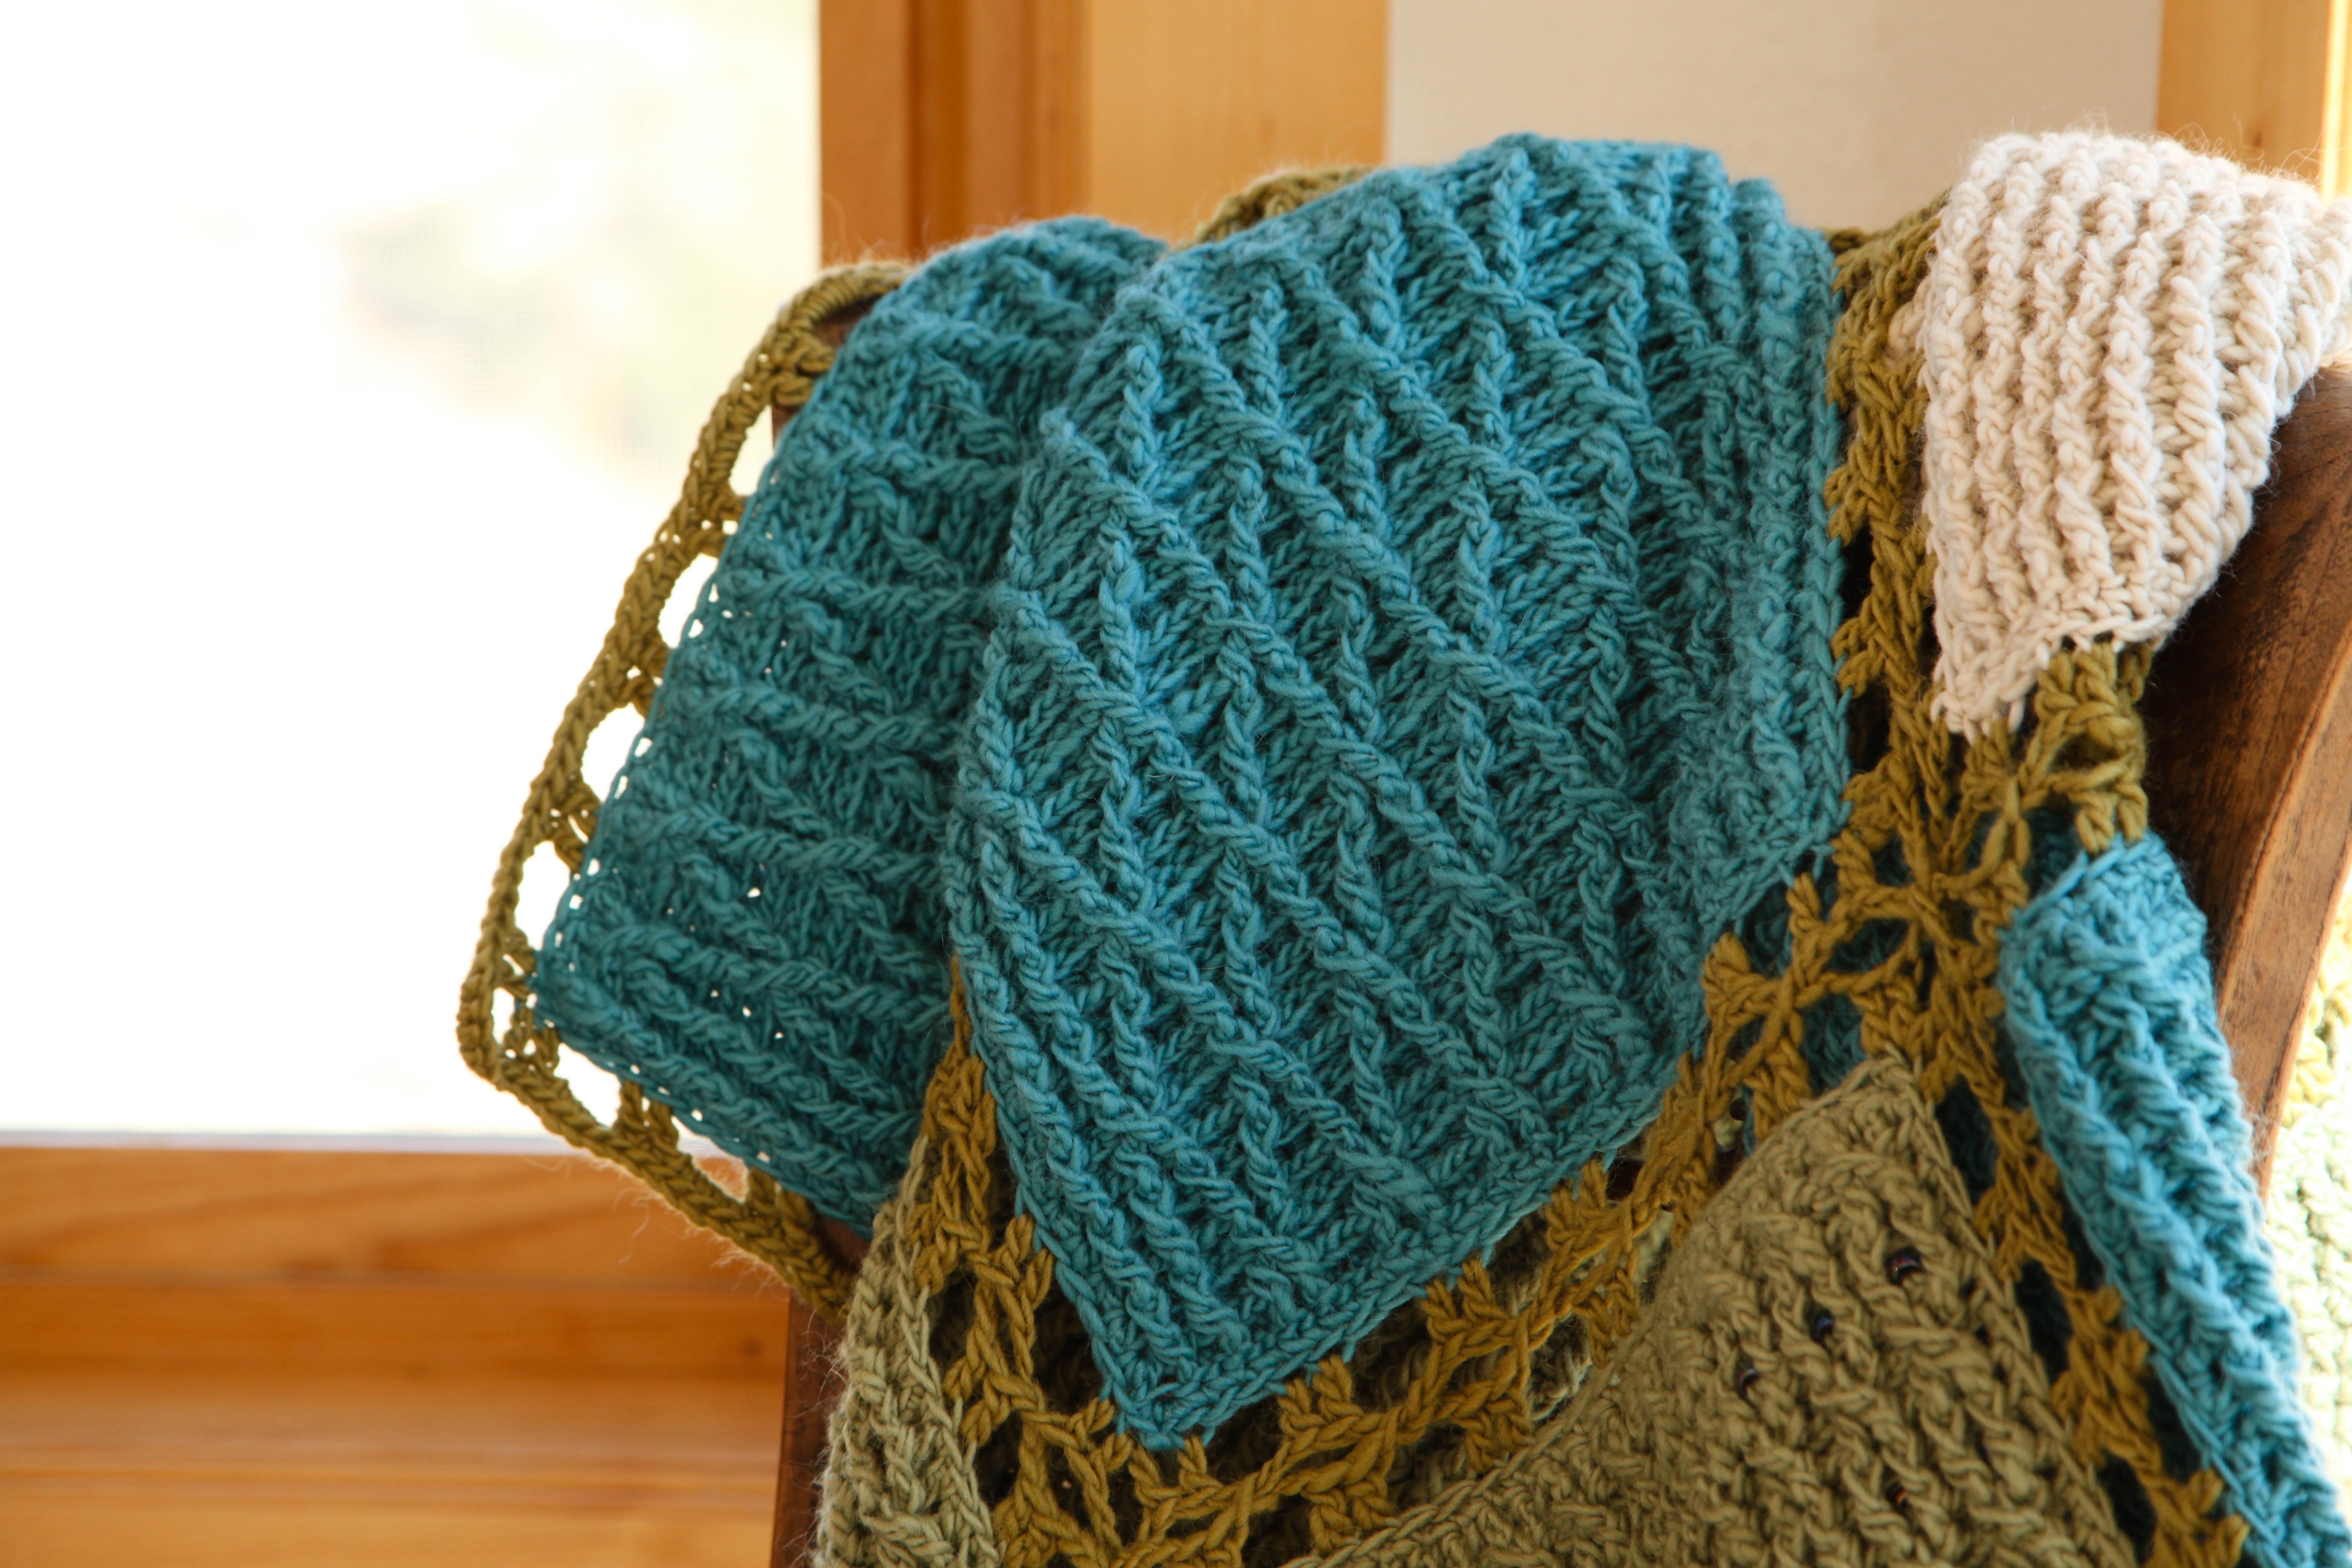 Free Craftsy class: Amazing Crochet Texture with Drew Emborsky, aka The Crochet Dude